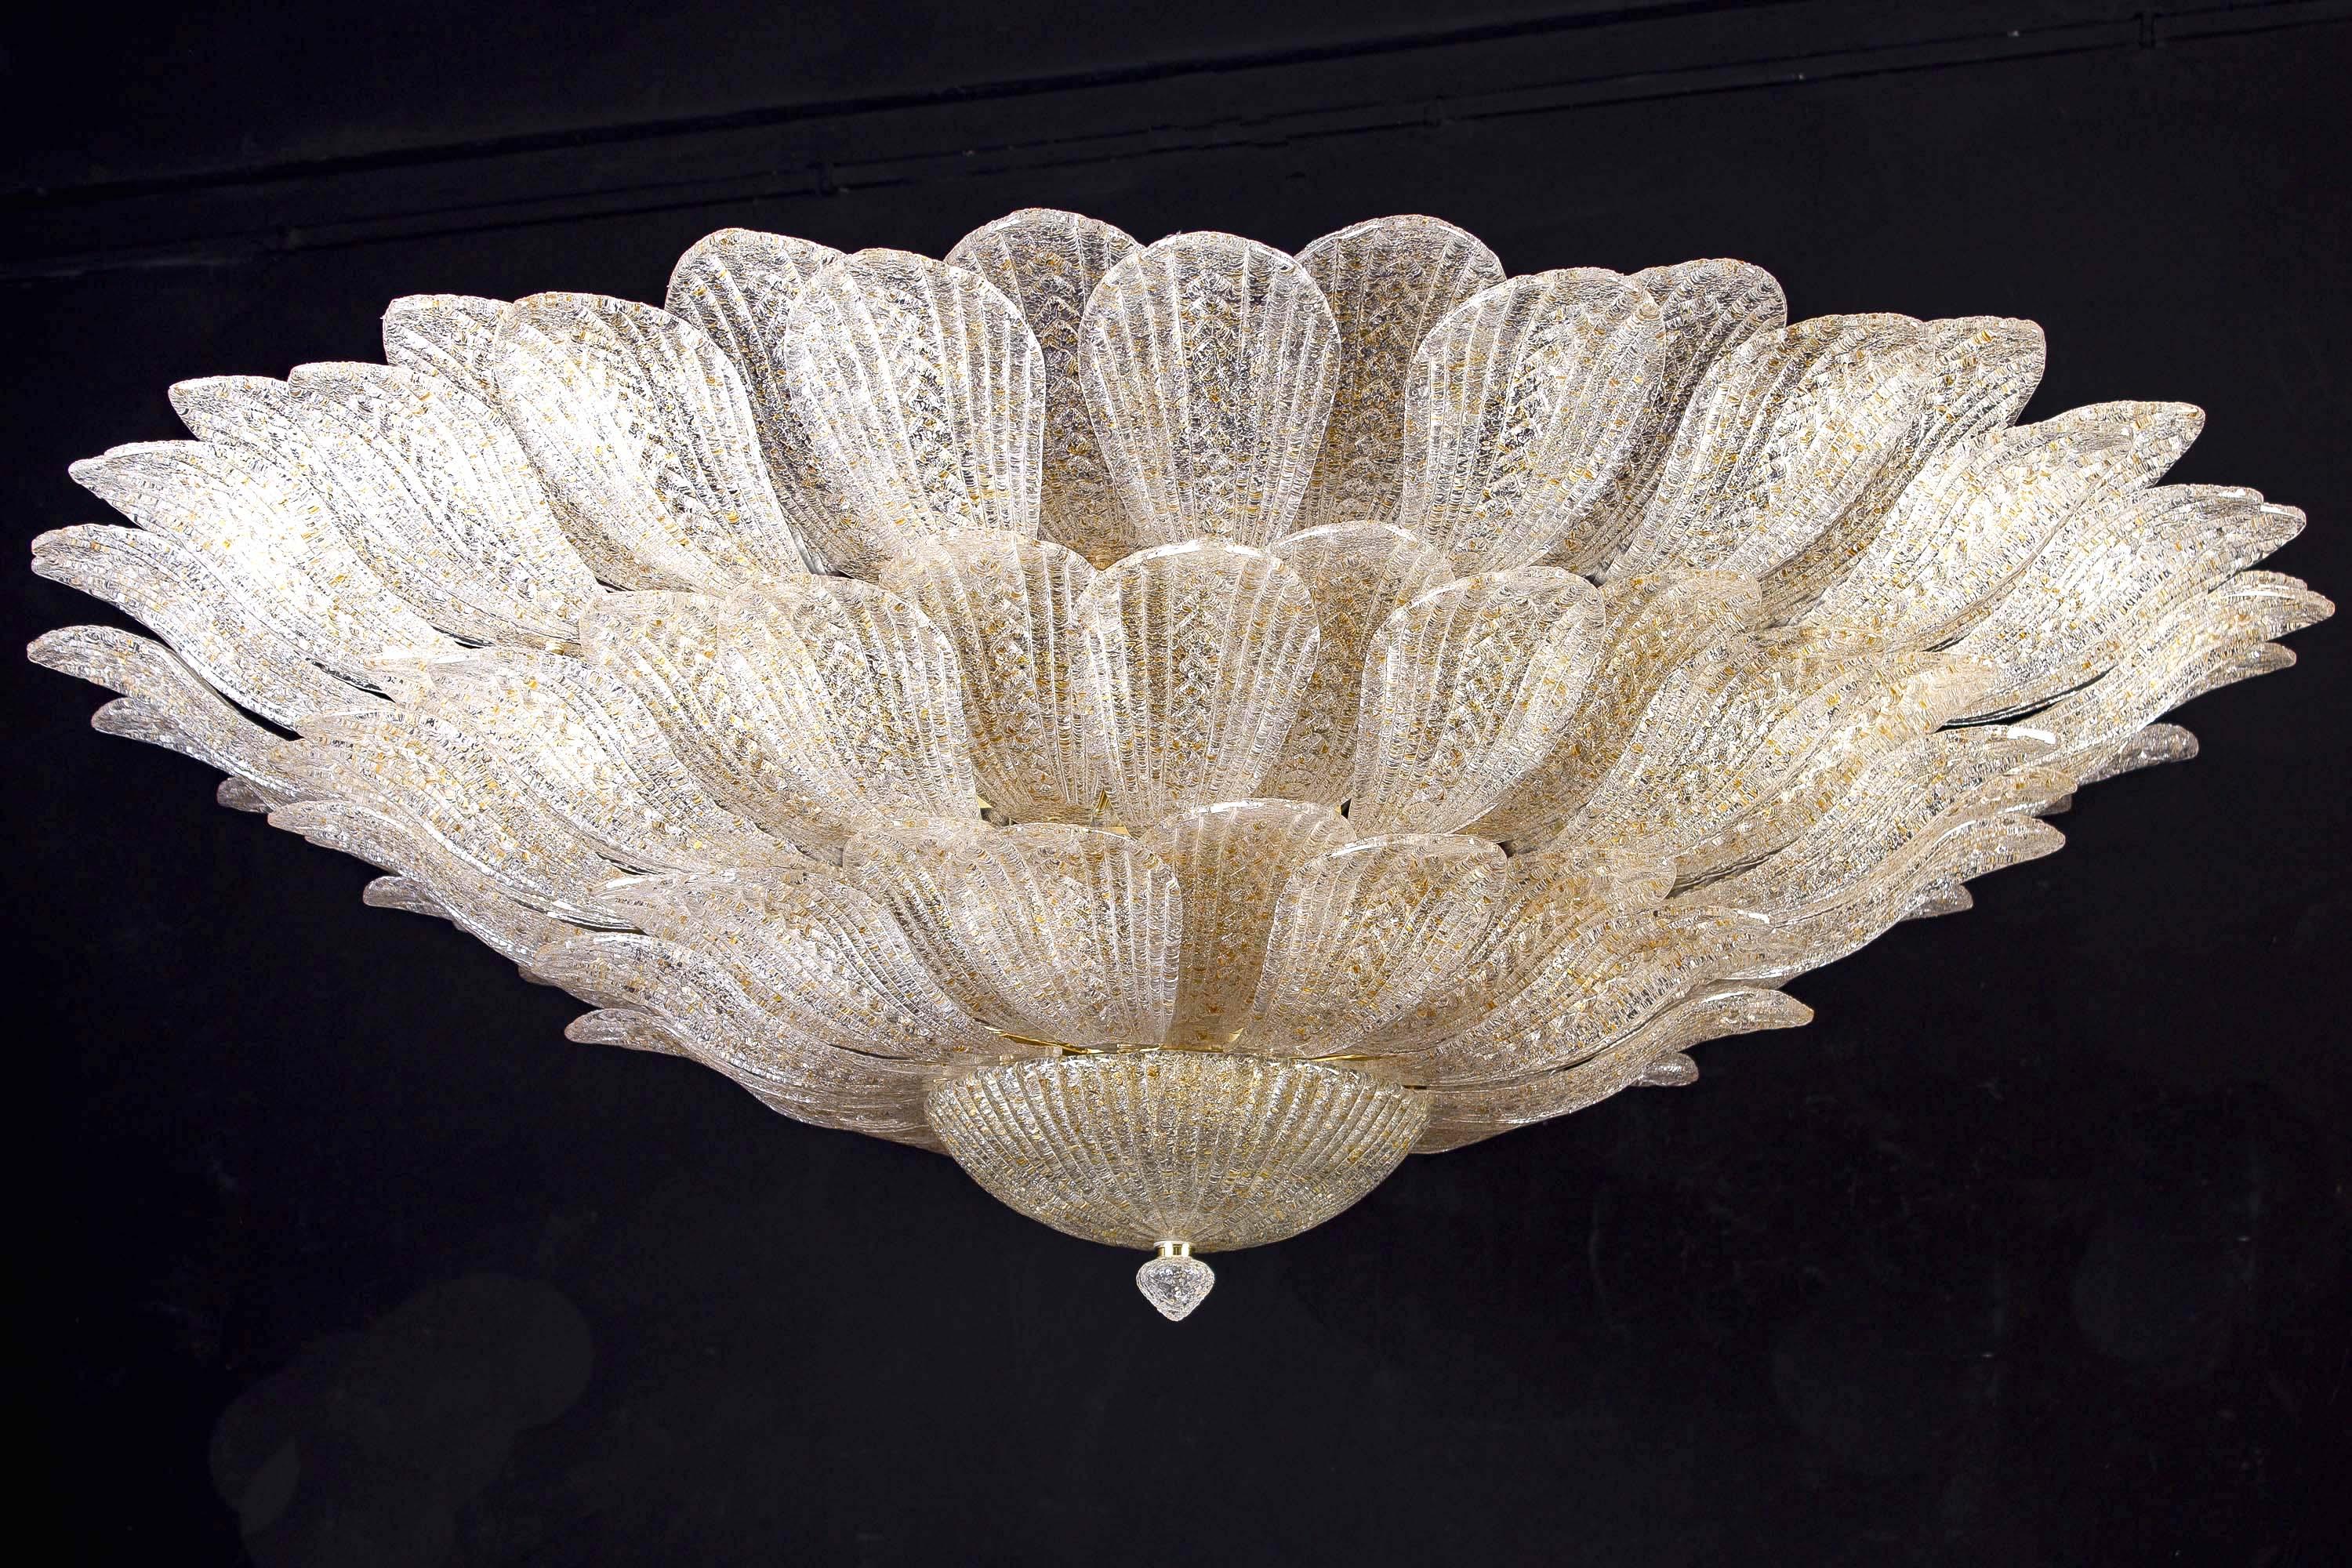 This striking ceiling light is realized in pure Murano glass, each chandelier consists of an incredible number of leaves with gold intrusion.
Gold-plated frame with 18 E 27 bulbs spread a magical light.
Available also a pair.
By Galleria